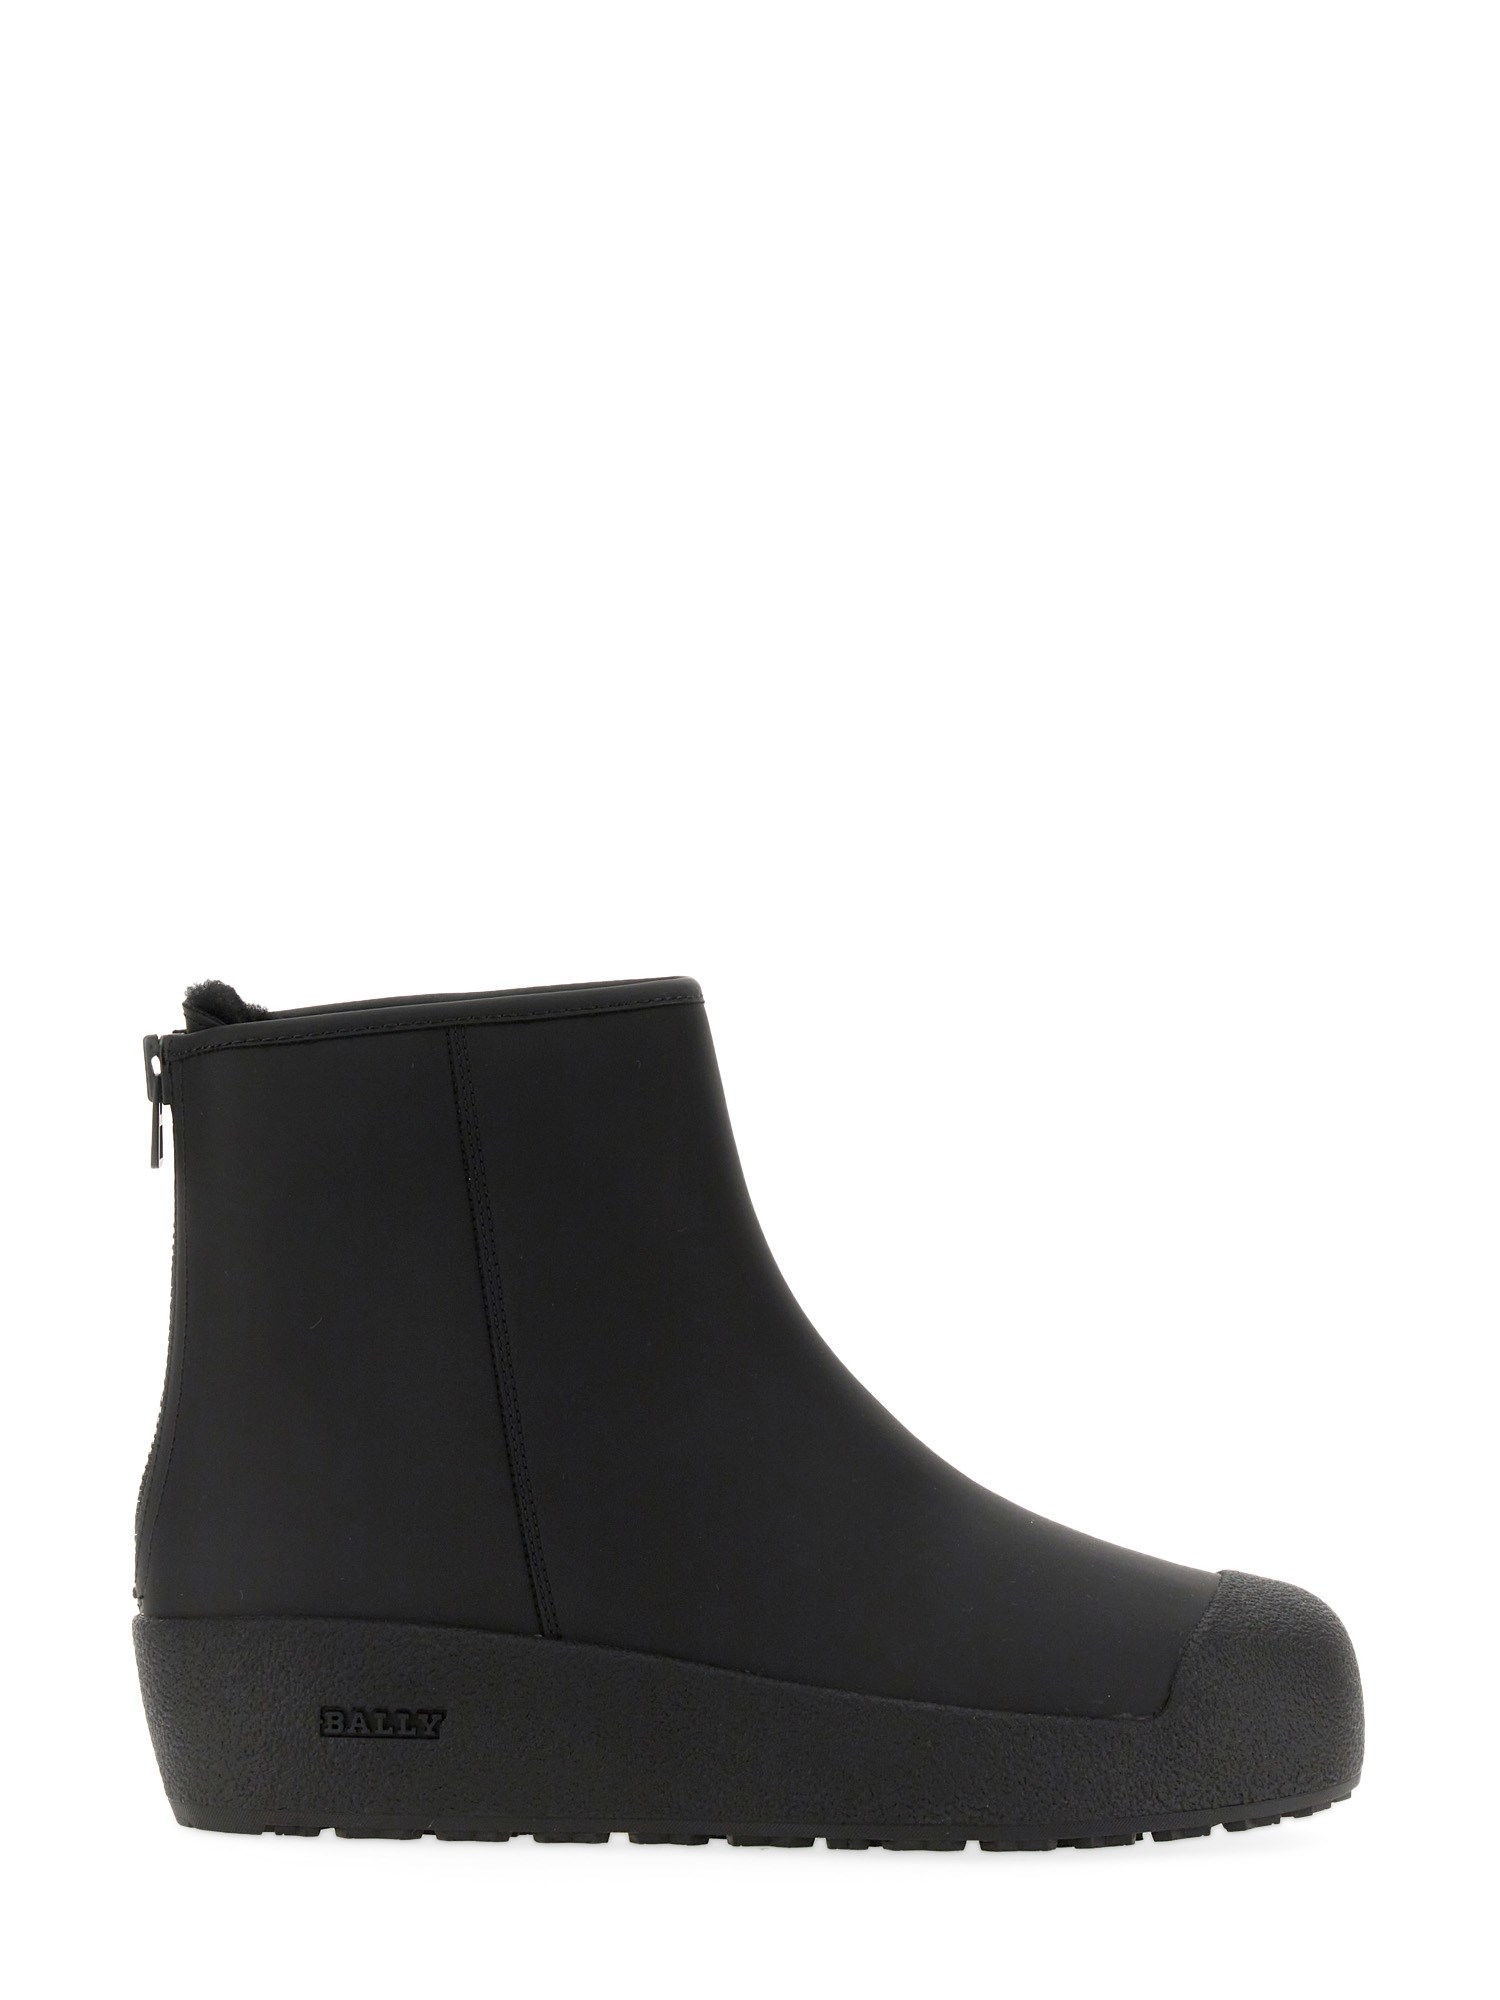 bally curling bally curling curling boot